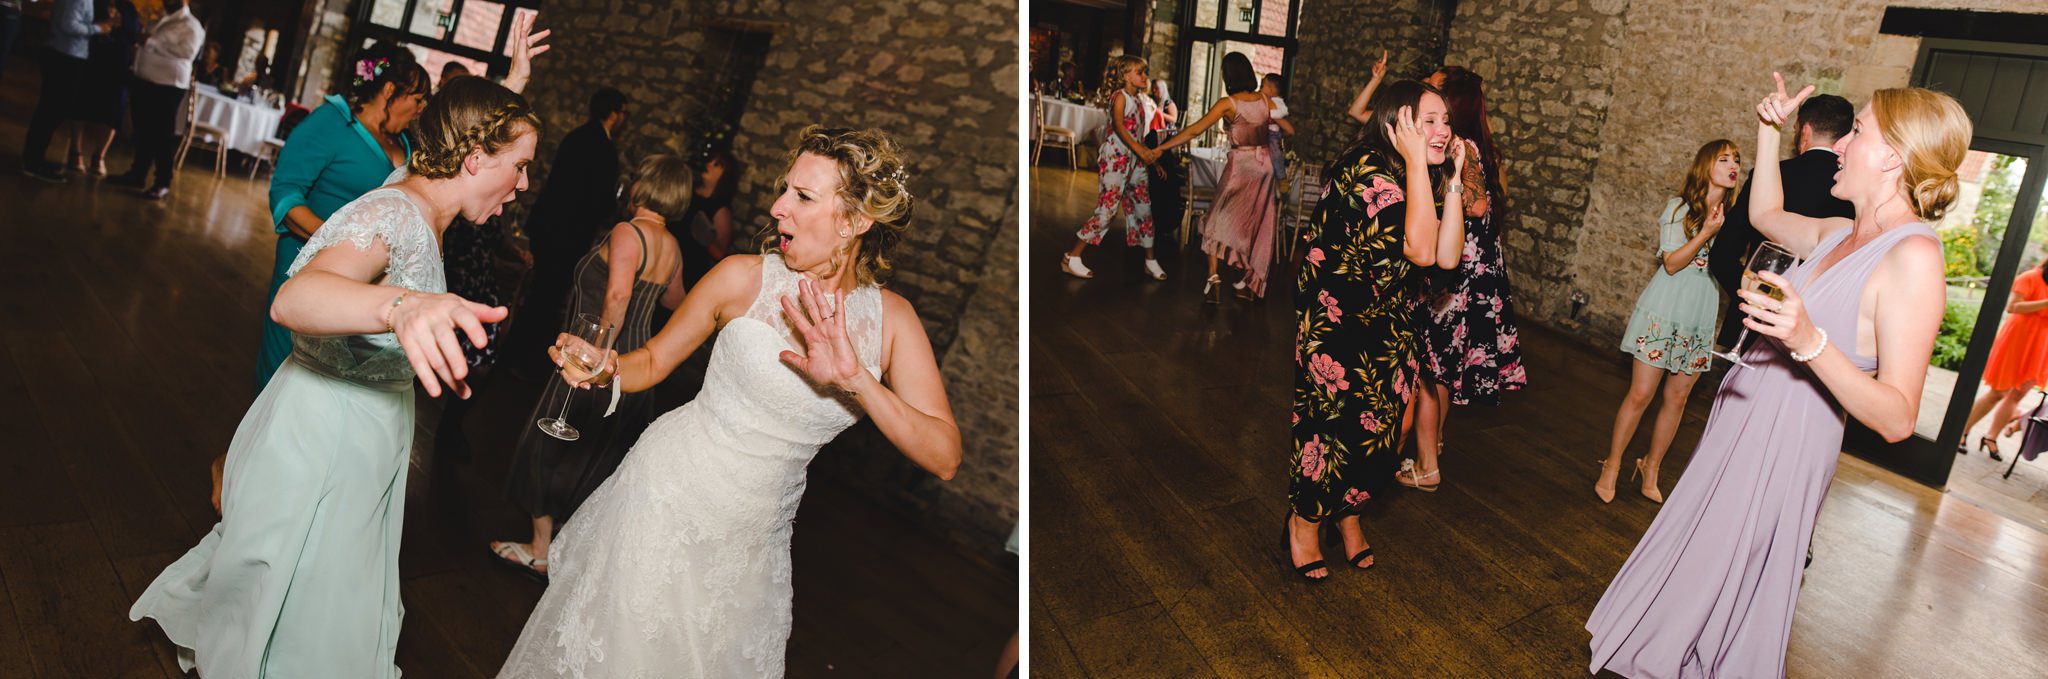 Guests on teh dancefloor at Priston Mill